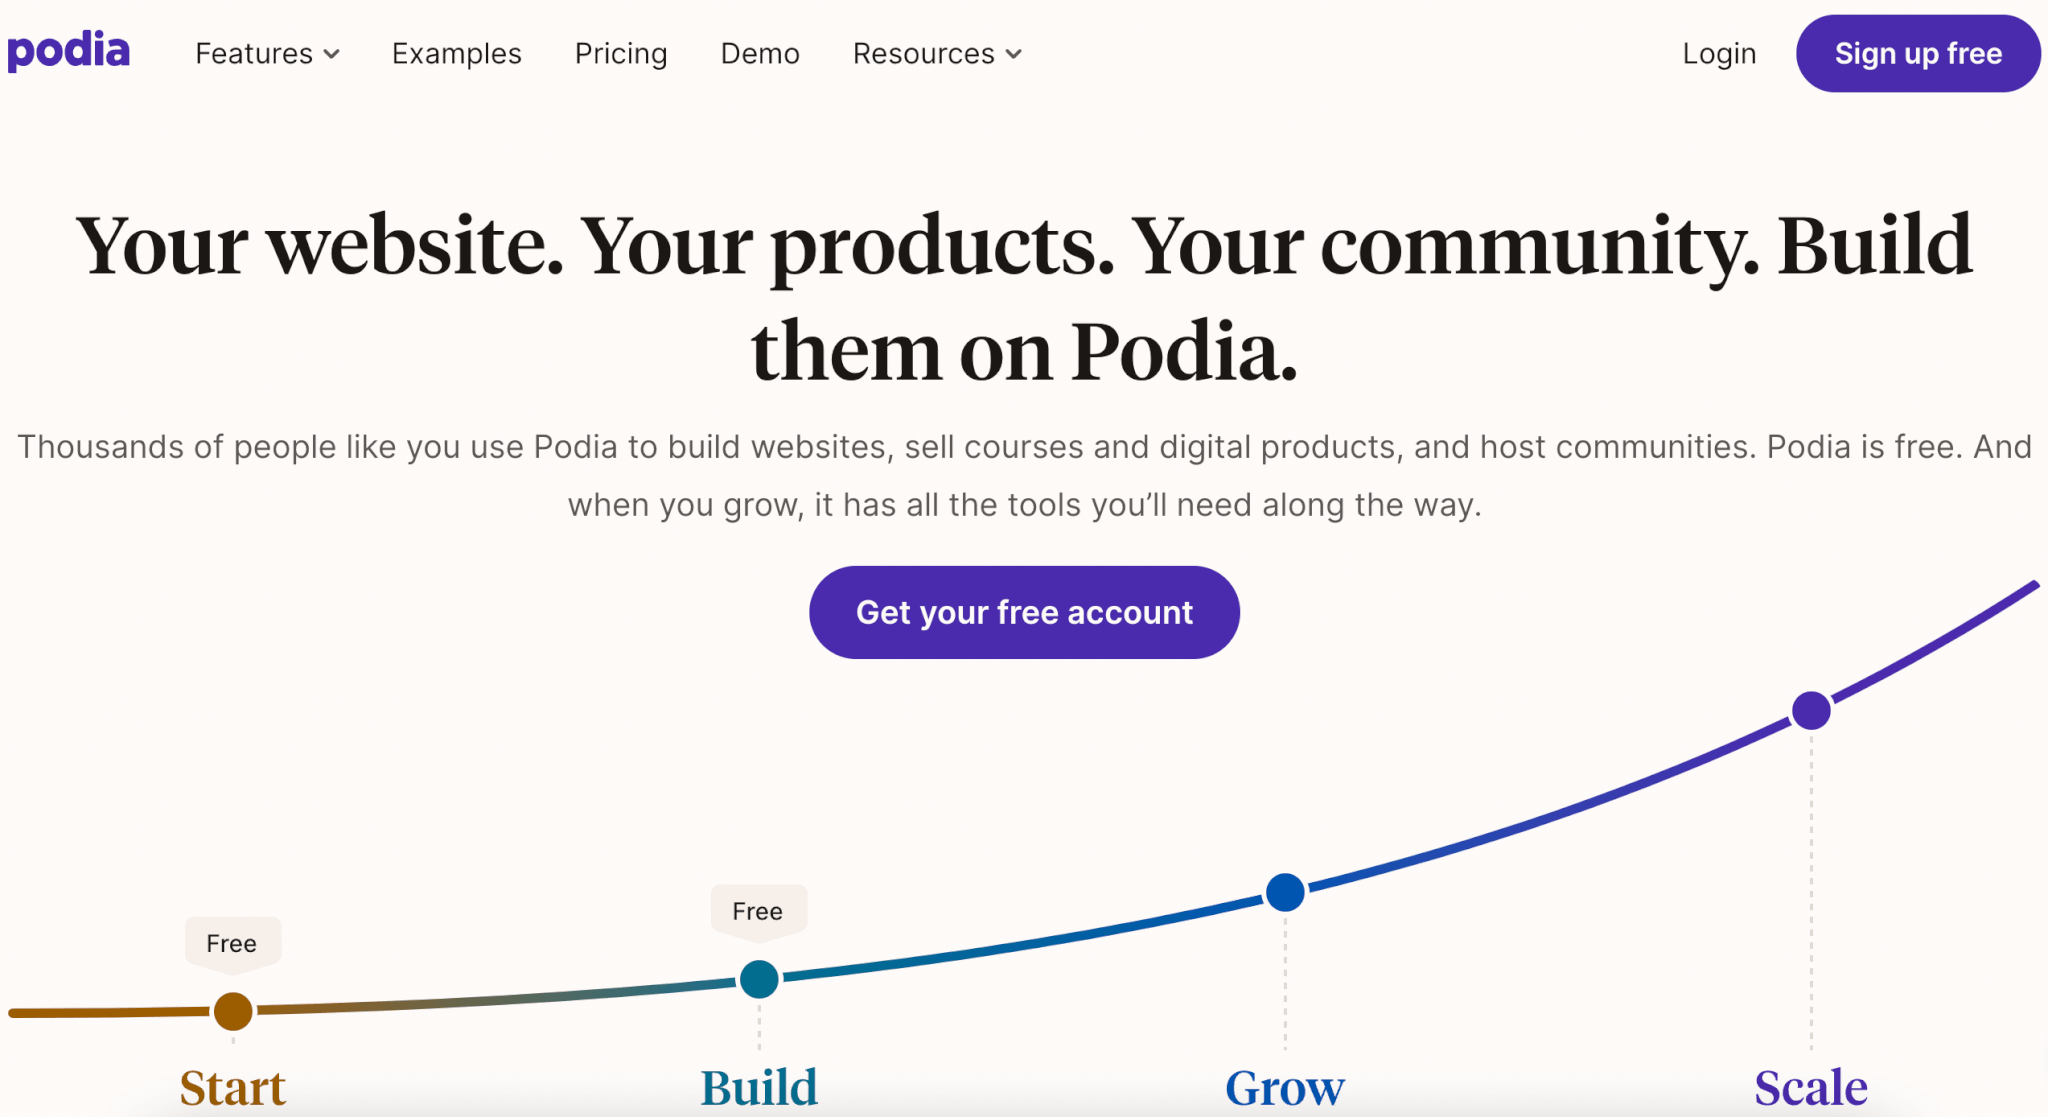 a screenshot of Podia's landing page showing a graph